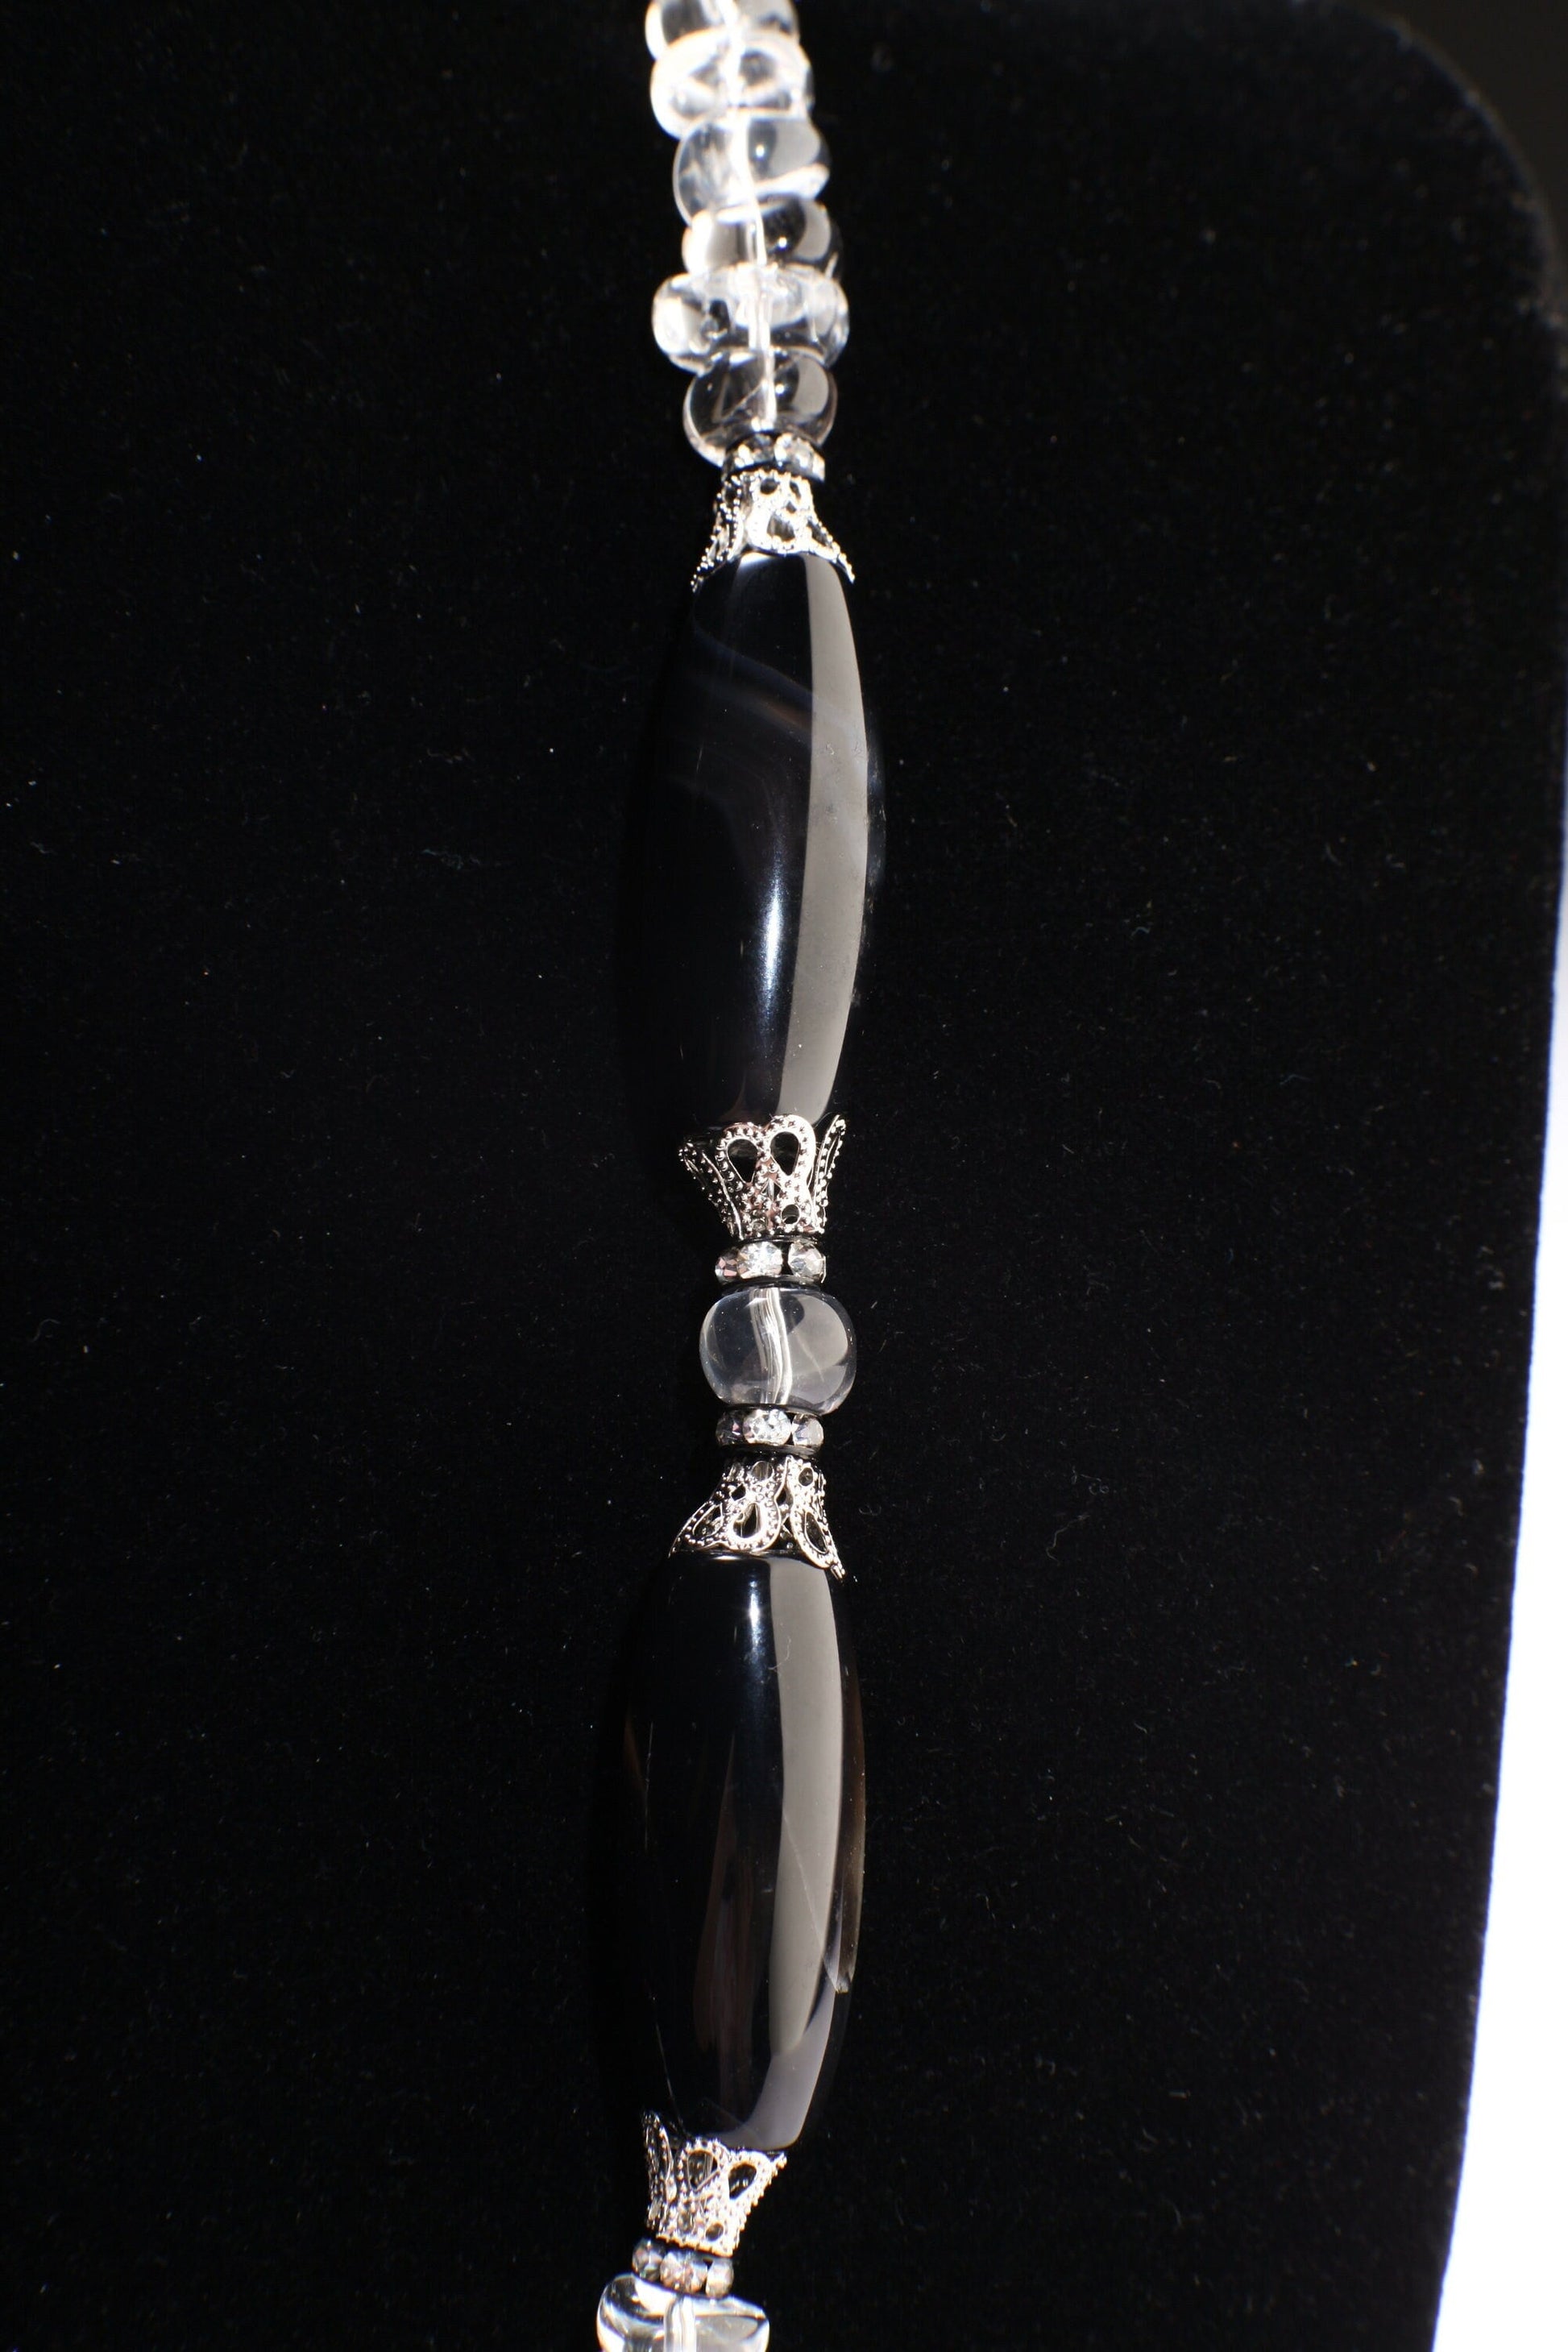 Natural Rock crystal tumble nugget,Black Agate 38mm Disk Pendant,Black Agate 14x34mm Long Oval Barrel Necklace 21&quot; with 2&quot; Extension,healing